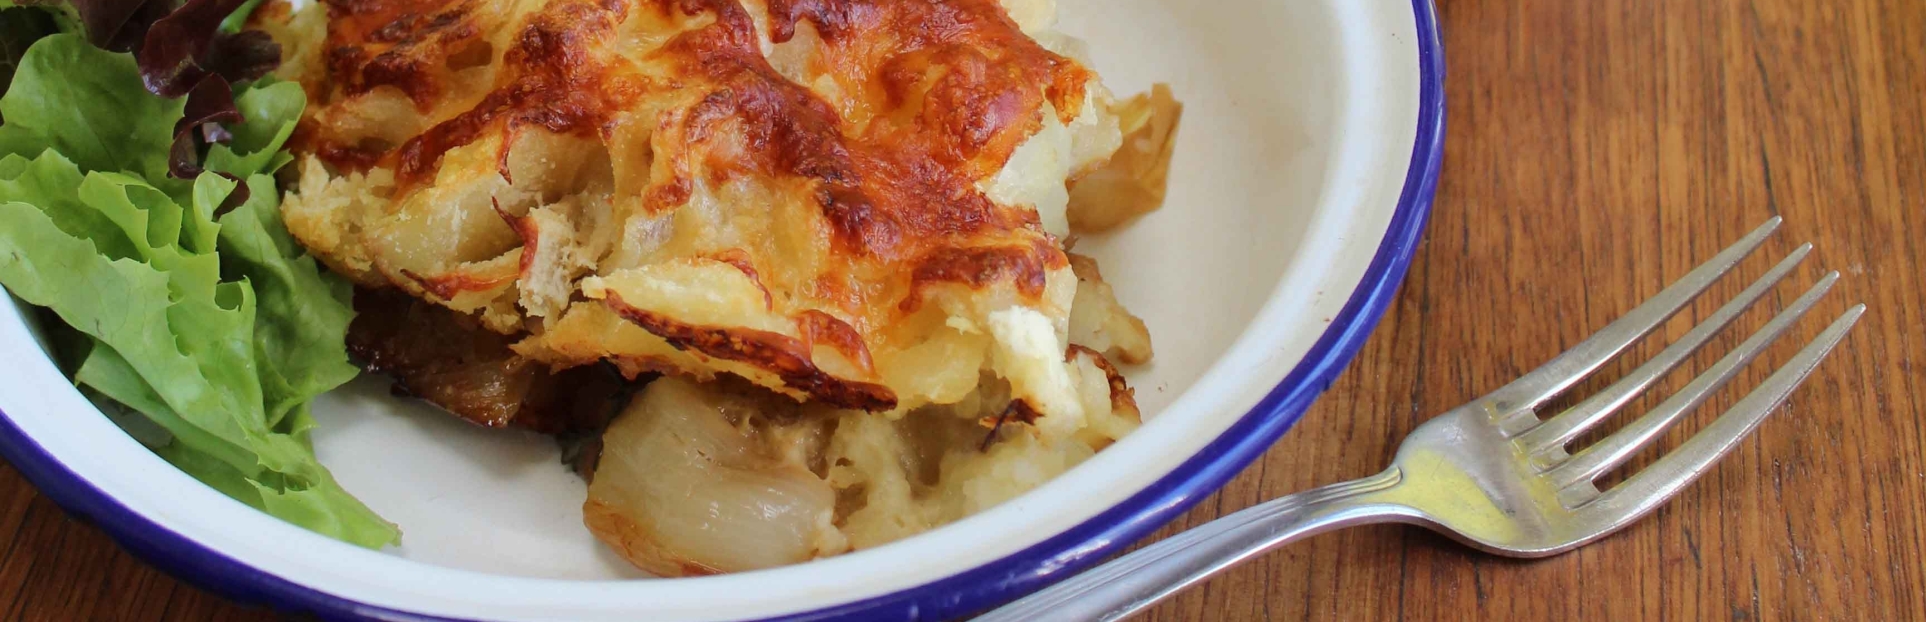 CHEESE AND ONION PIE